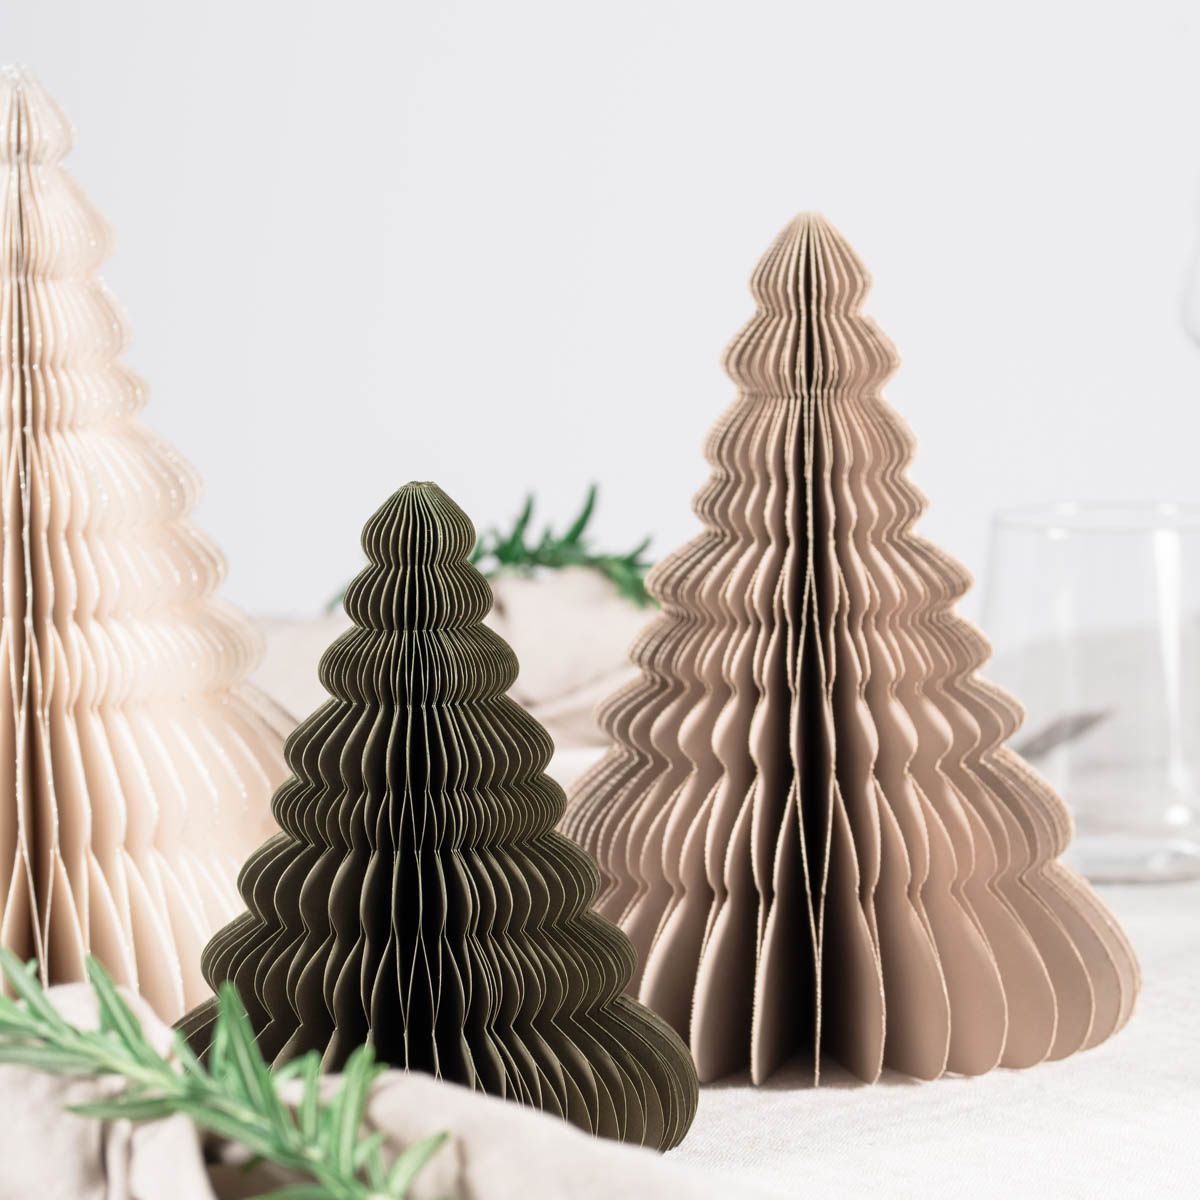 1 Off-White, 1 Olive Green  and 1 Linen coloured Paper Standing Christmas Trees, in front of a white painted wall and resting on a table laid with white linen with glassware and rosemary sprigs